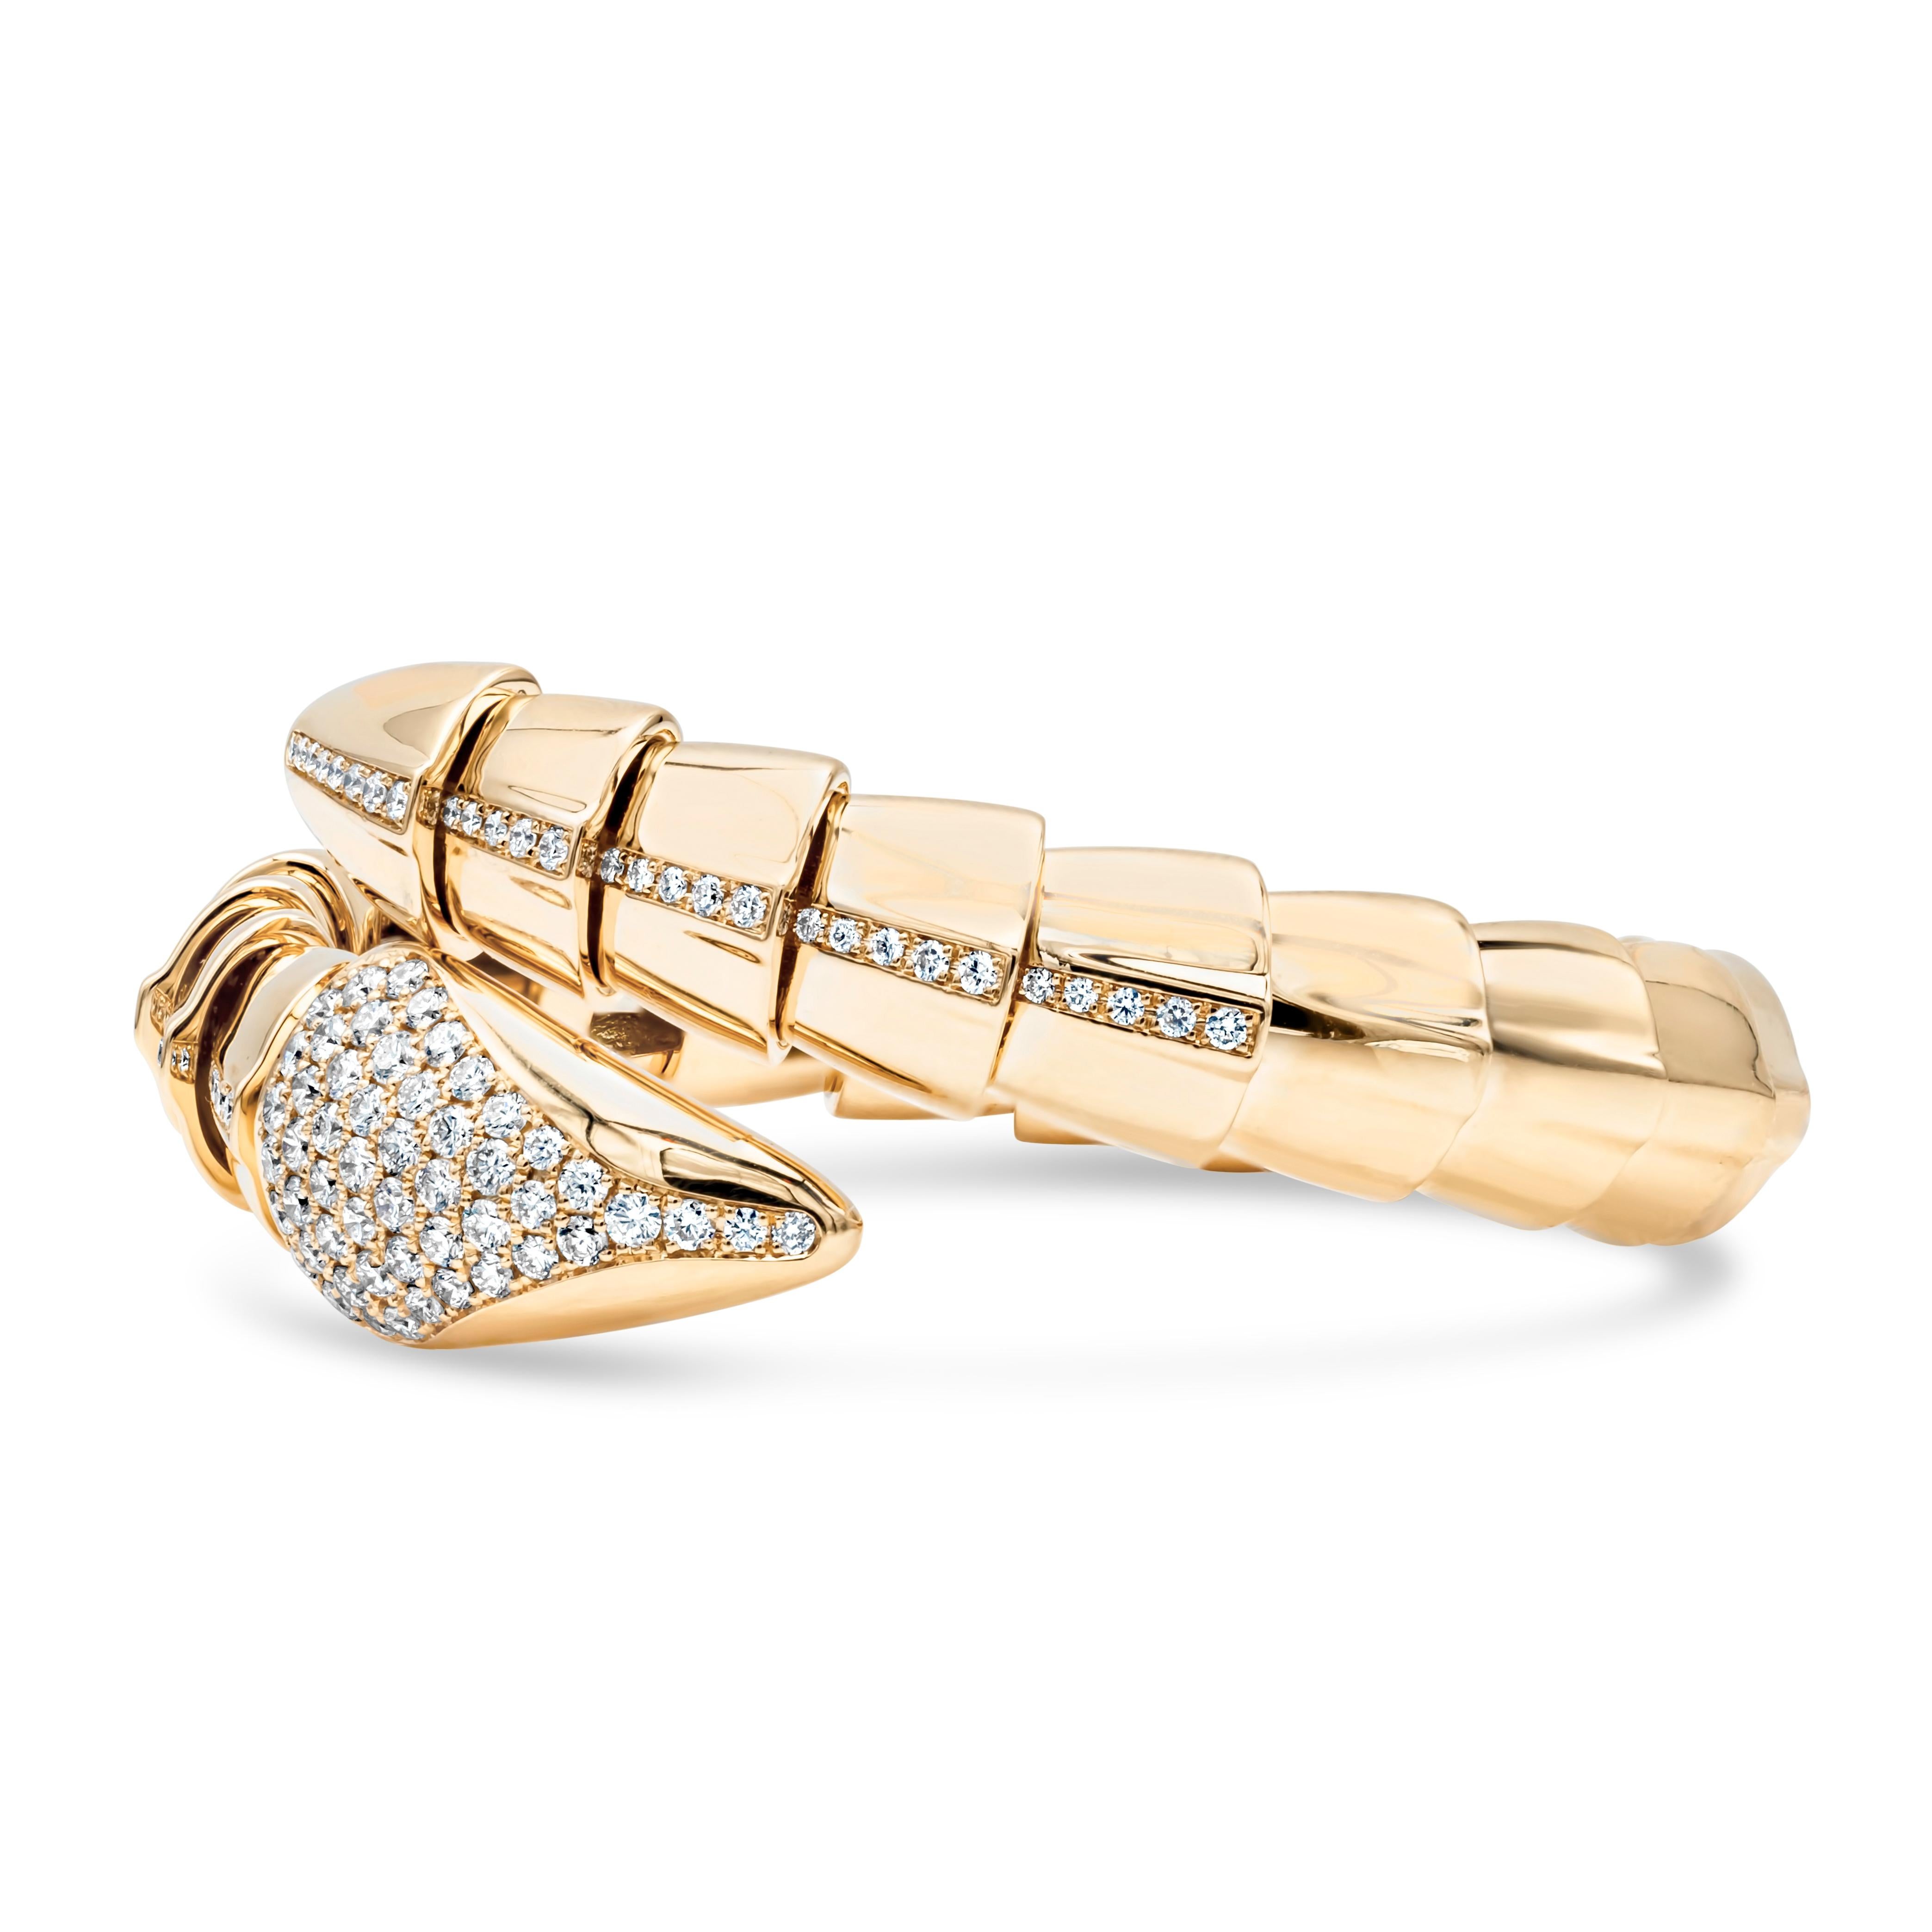 An artistic and high-quality bangle bracelet, featuring a serpentine motif made with 18K yellow gold. Beautifully accented with 100 round brilliant cut diamonds weighing 1.74 carats total with F color and VS-SI clarity. Perfect jewelry to accompany